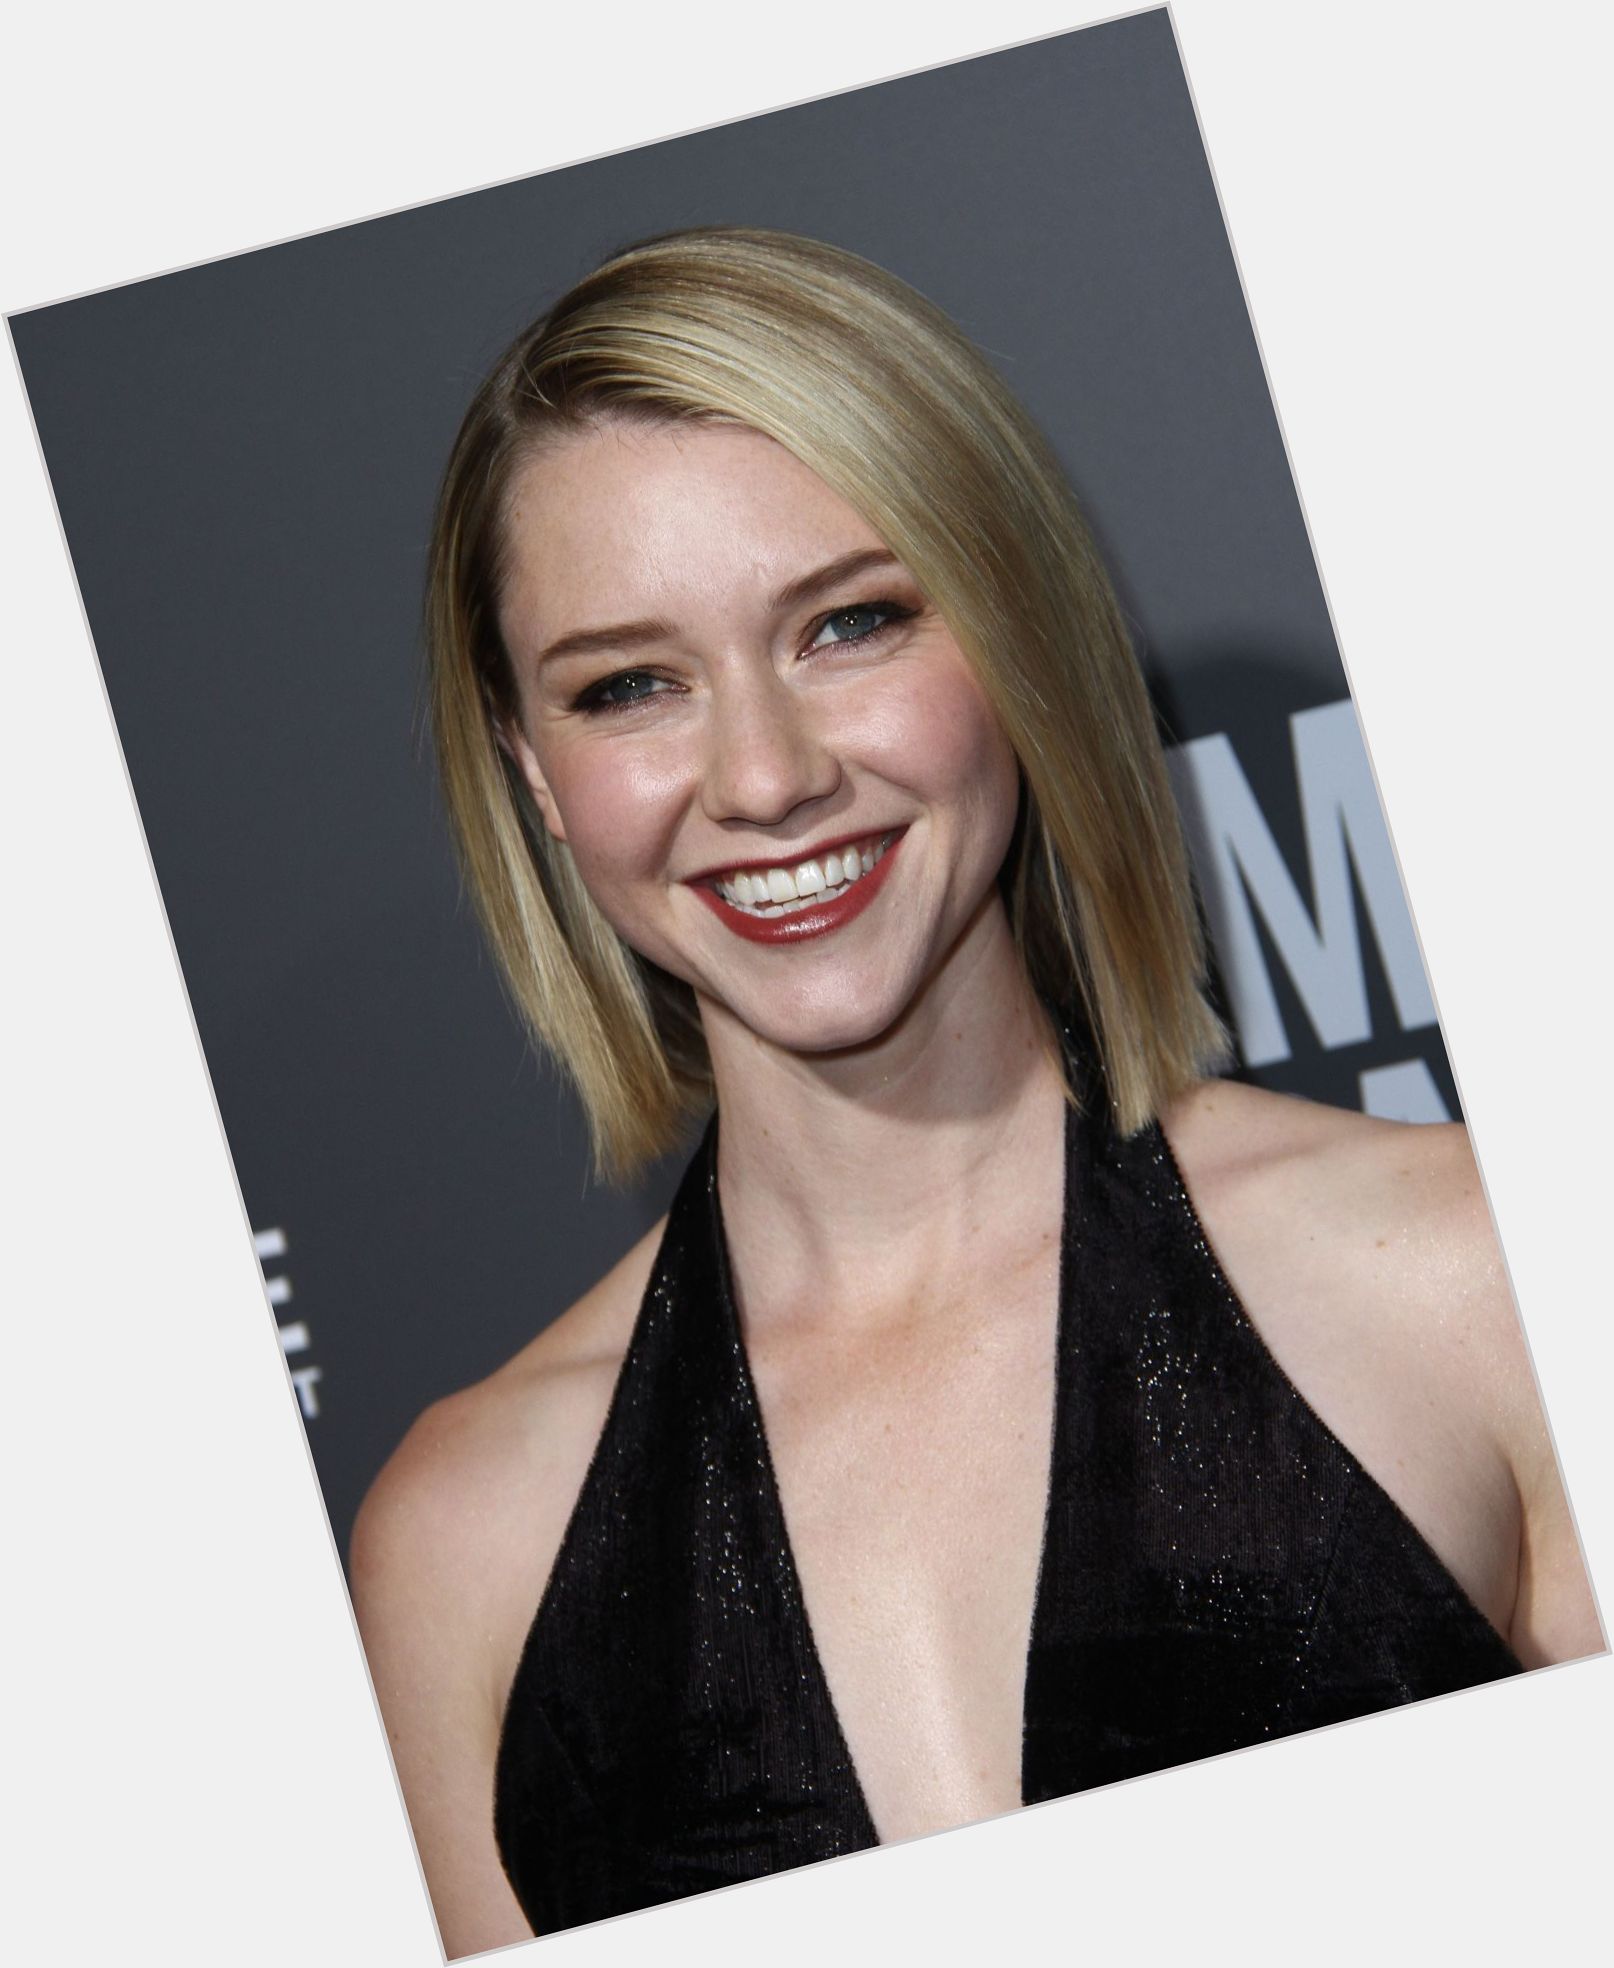 Http://fanpagepress.net/m/V/valorie Curry The Following 1